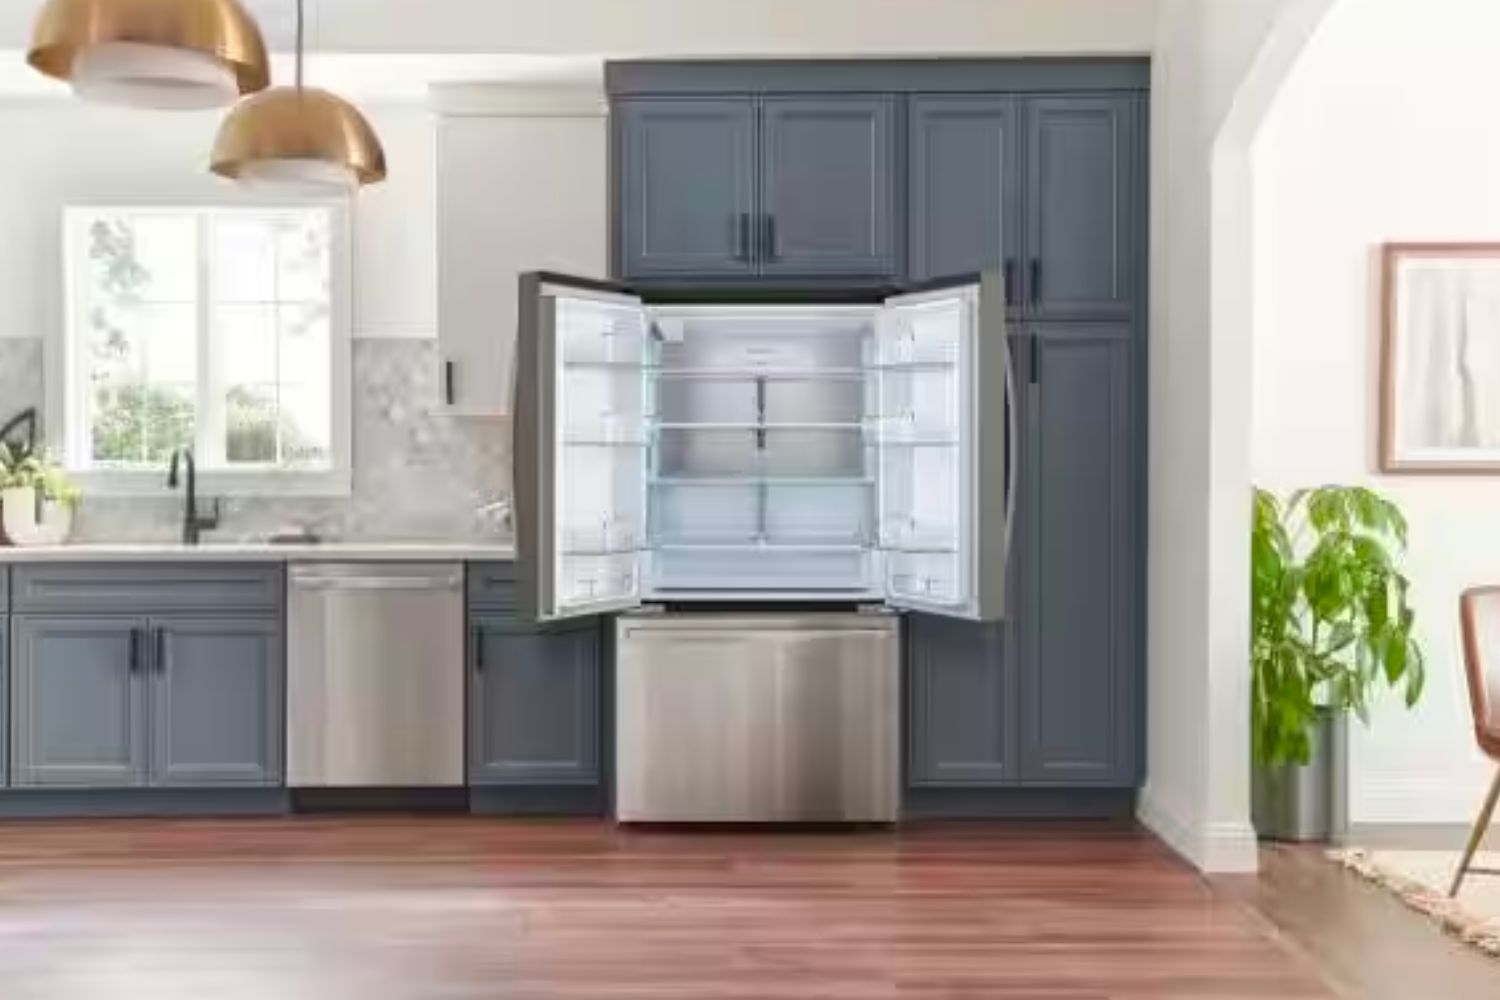 The best French door refrigerator option with both doors open to show its massive capacity